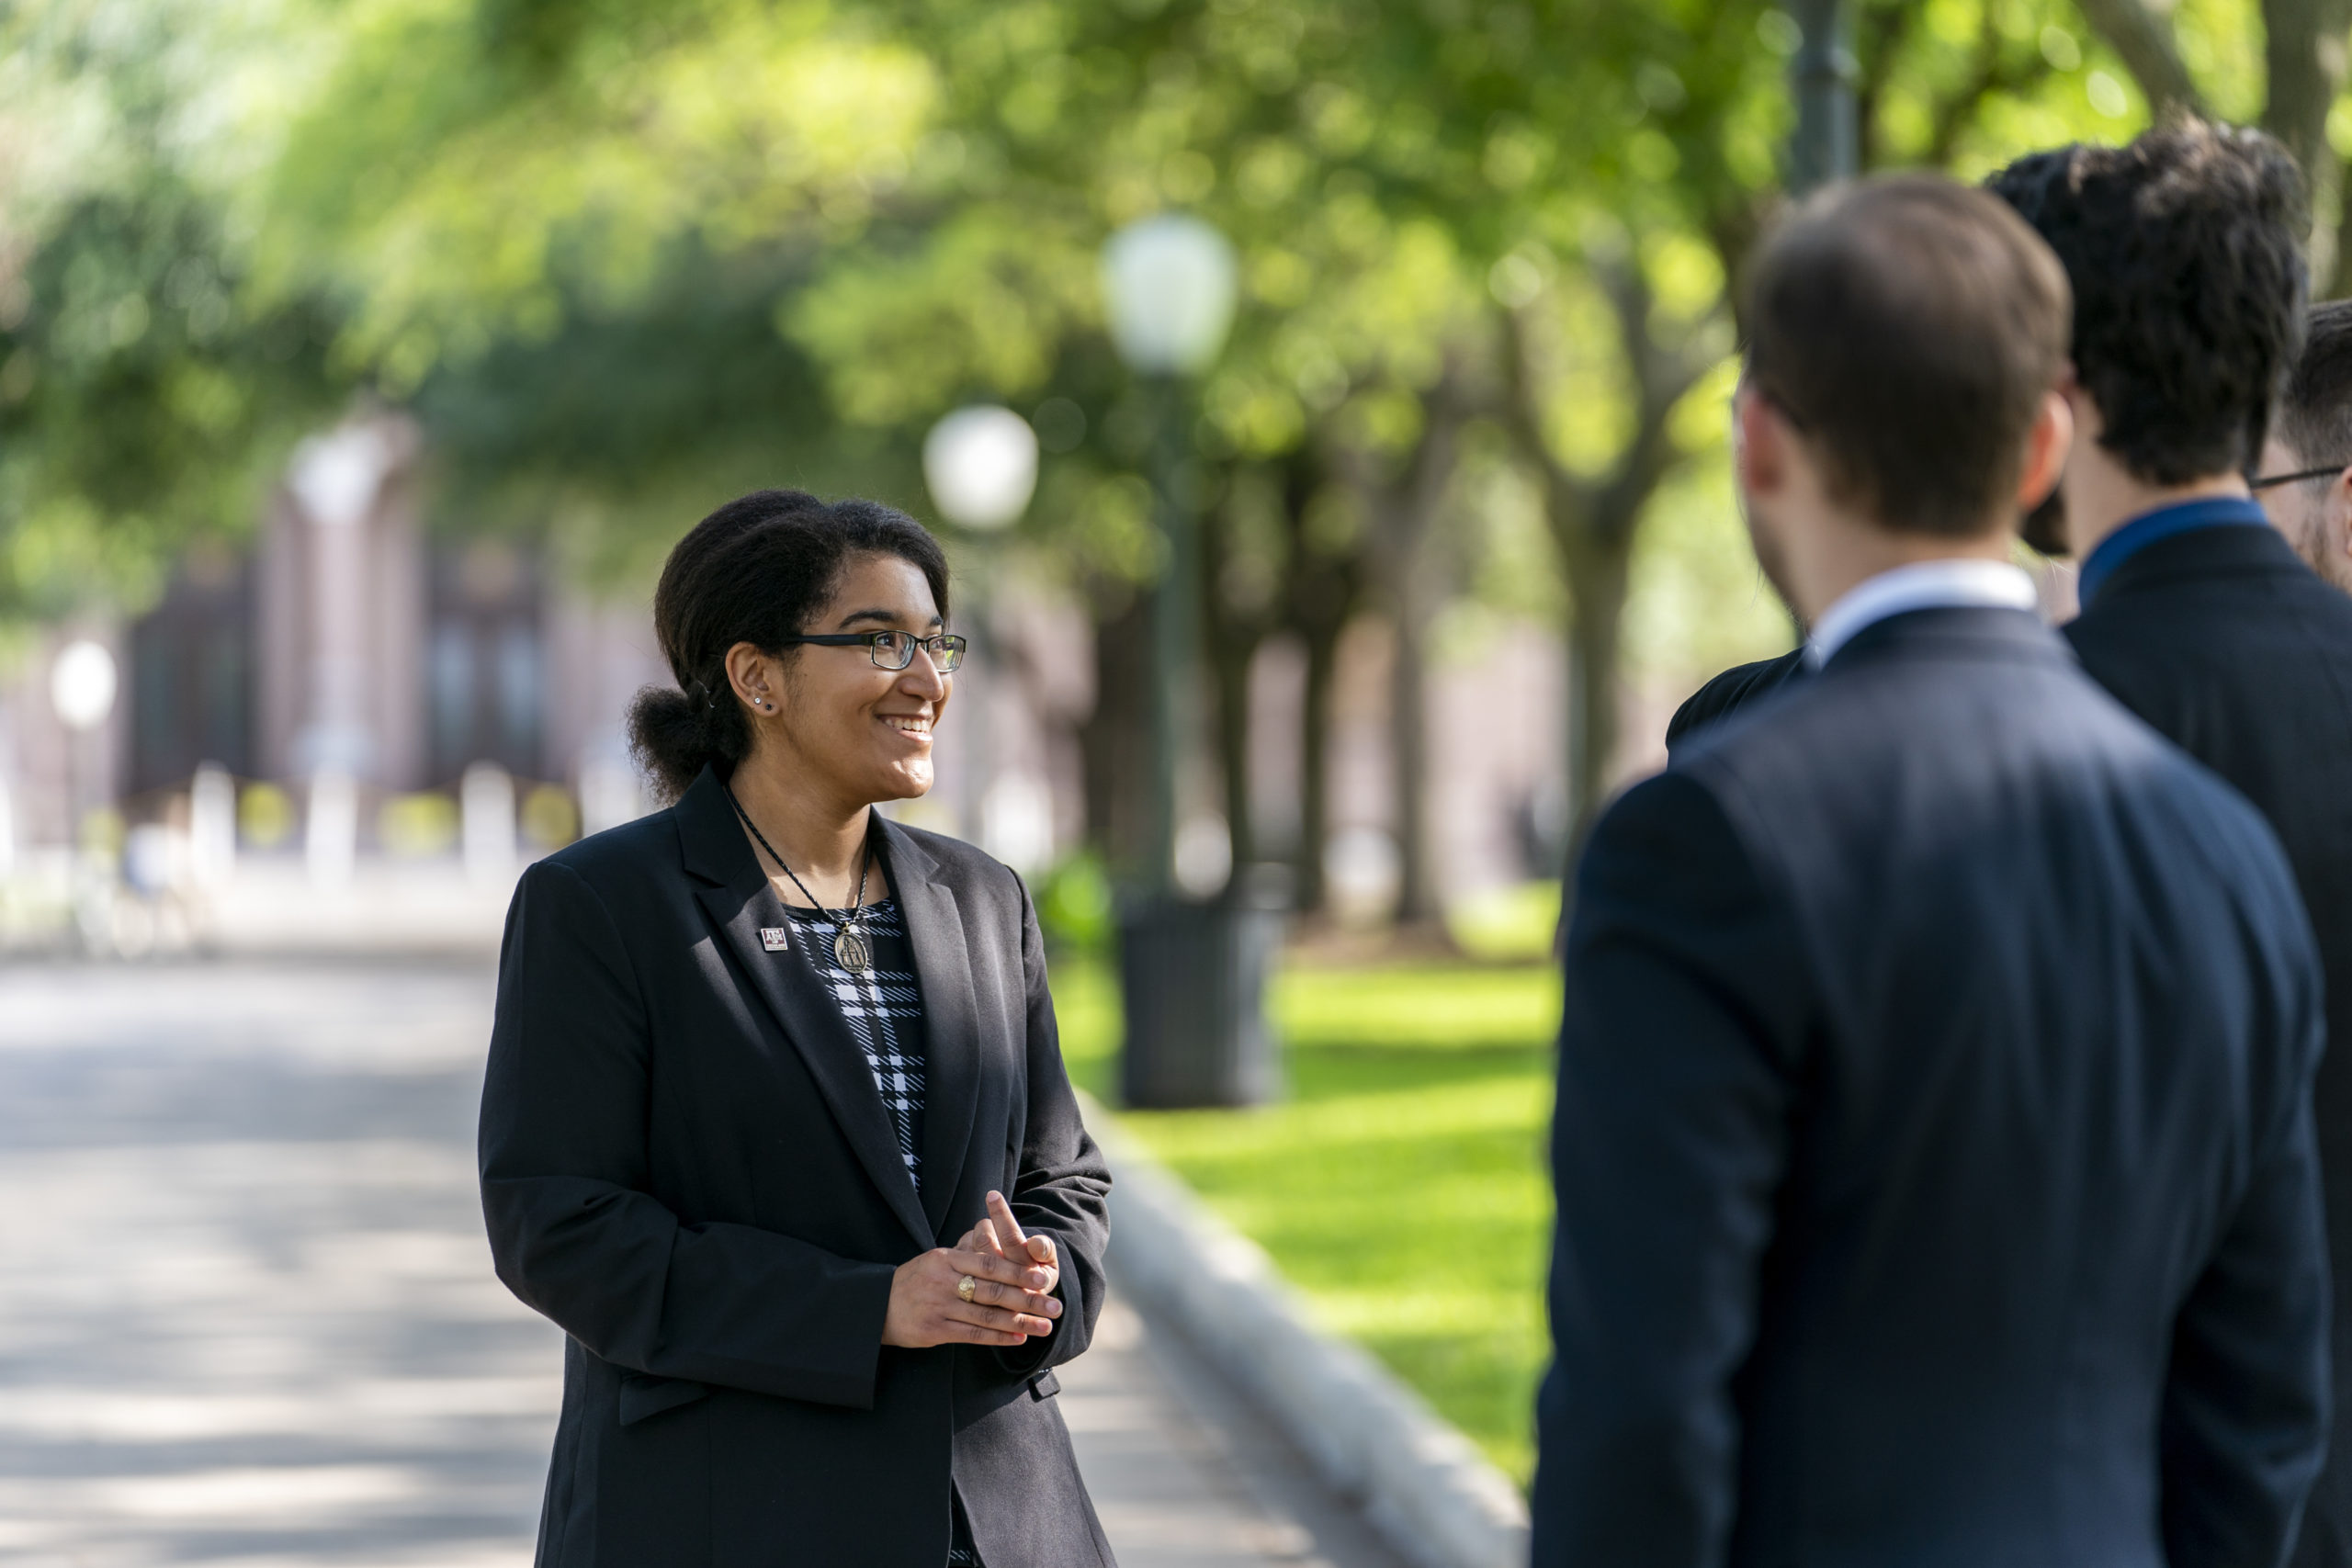 Student in suit talking to other students